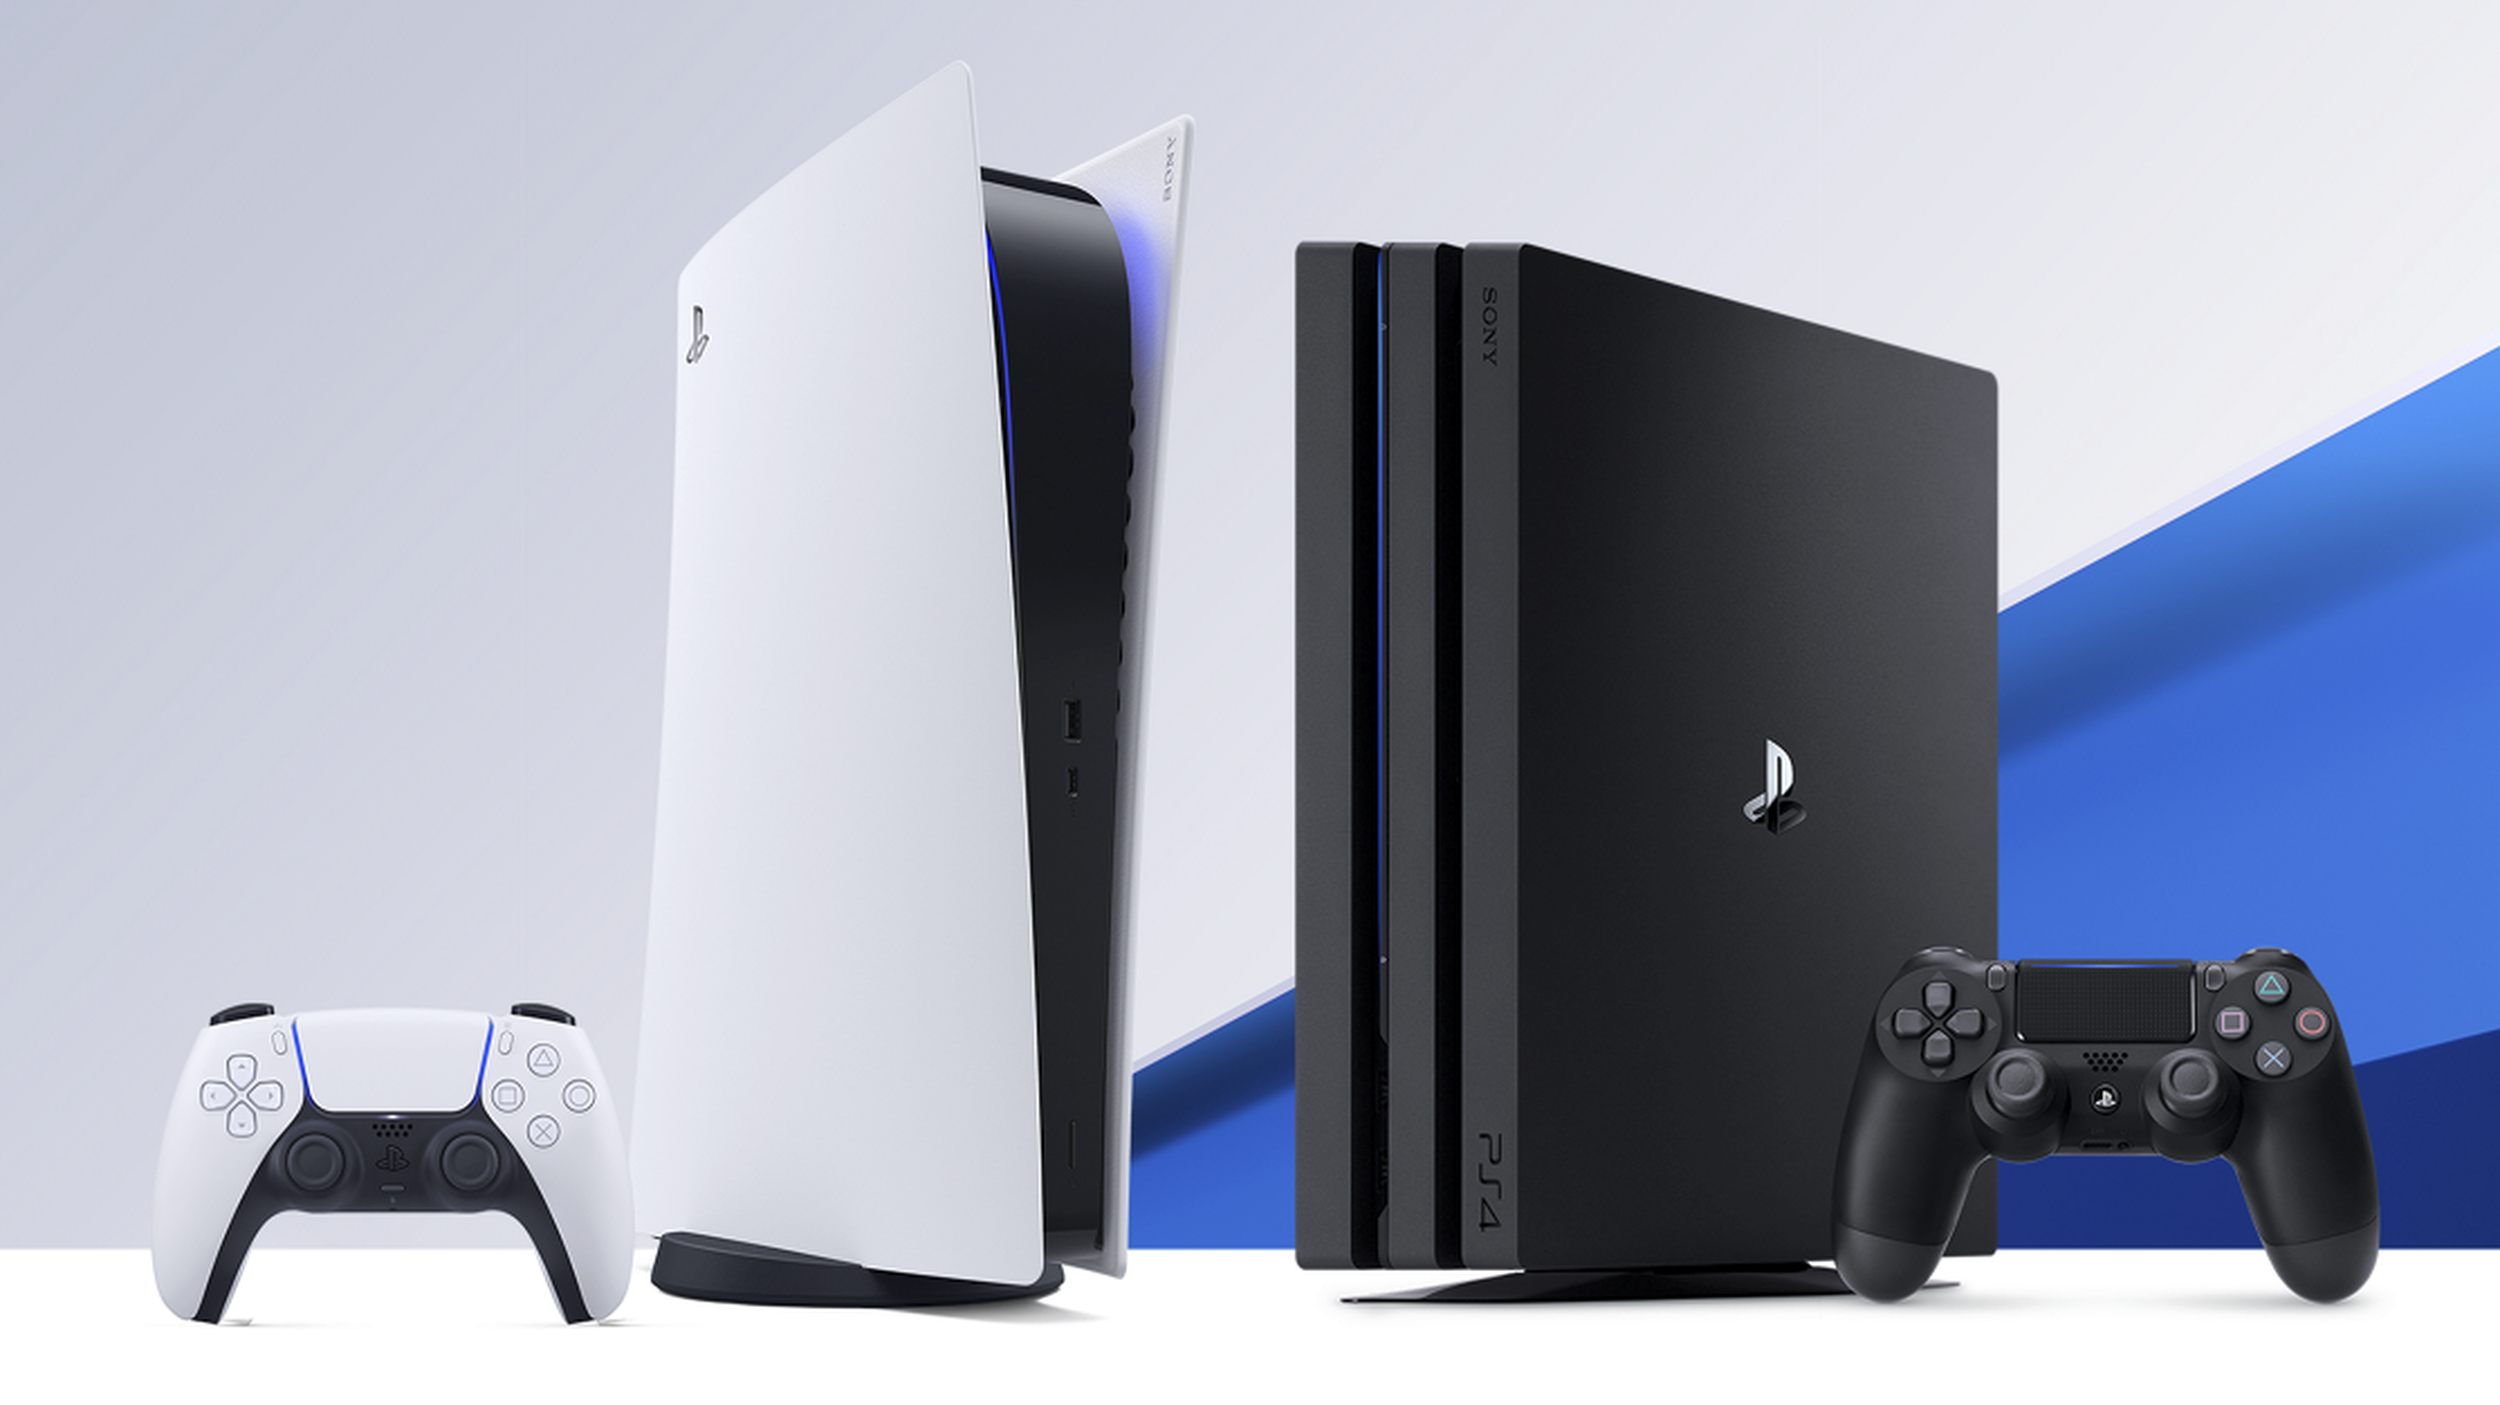 Game On: PlayStation 4 will be phased out starting in 2025, and that's OK